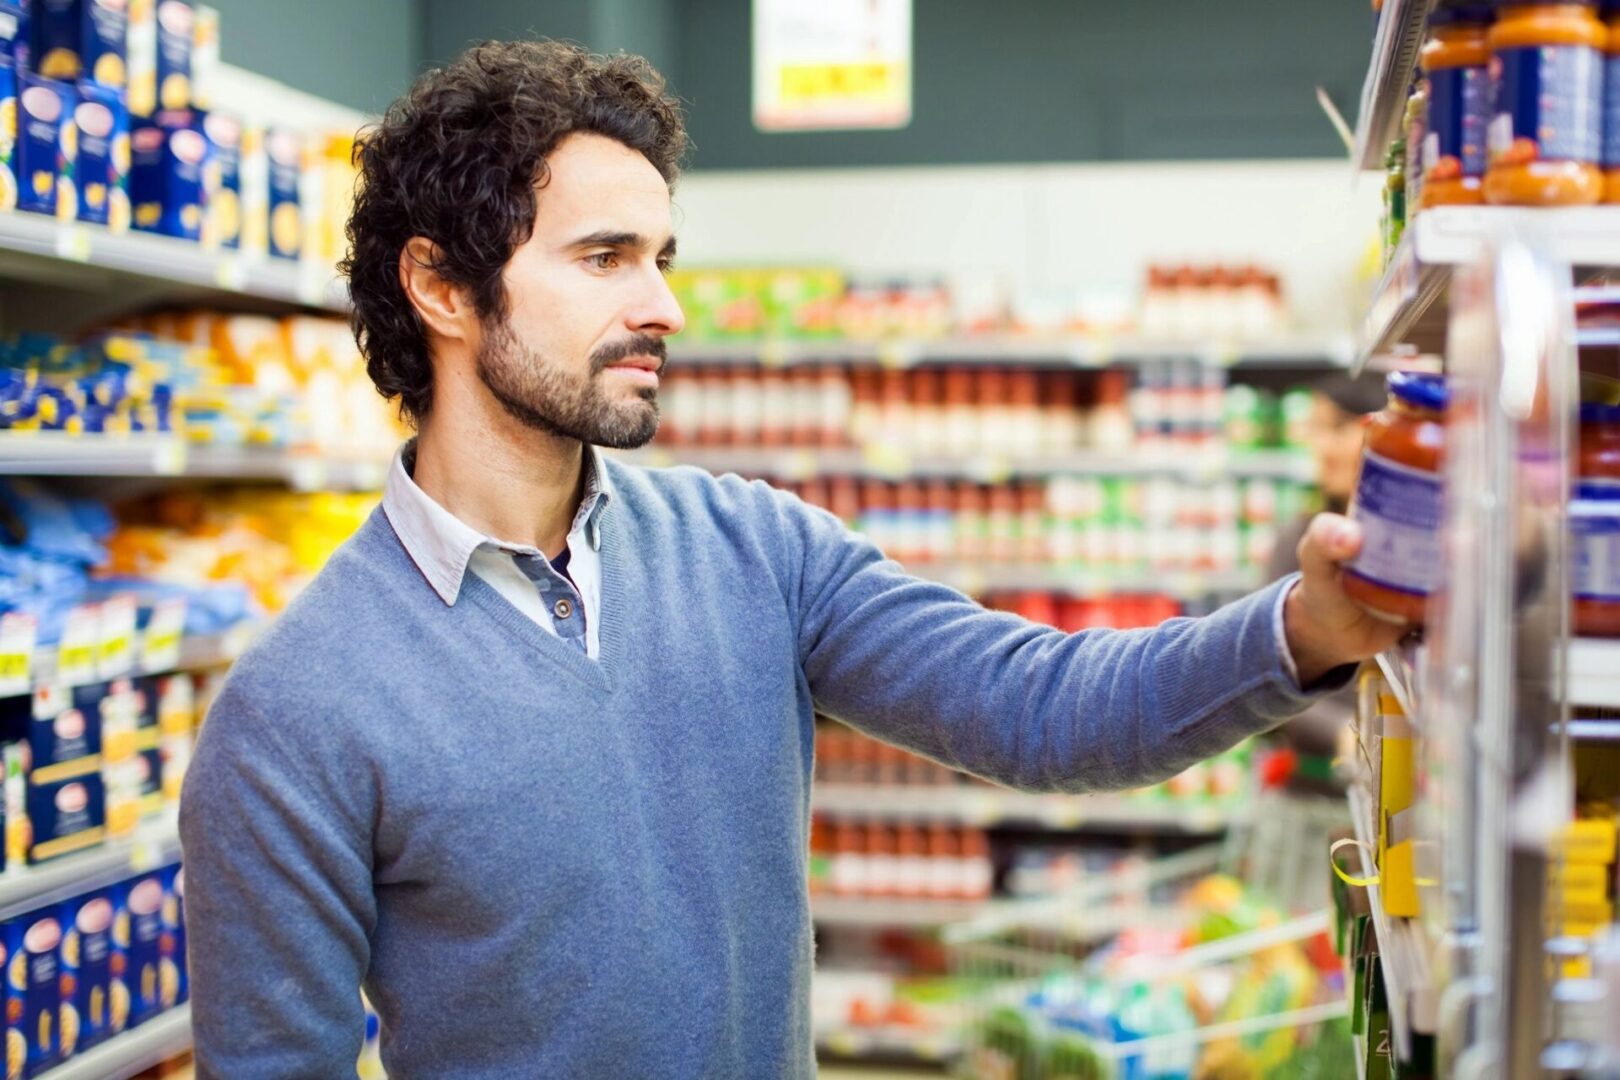 A man in a grocery store holding a knife.